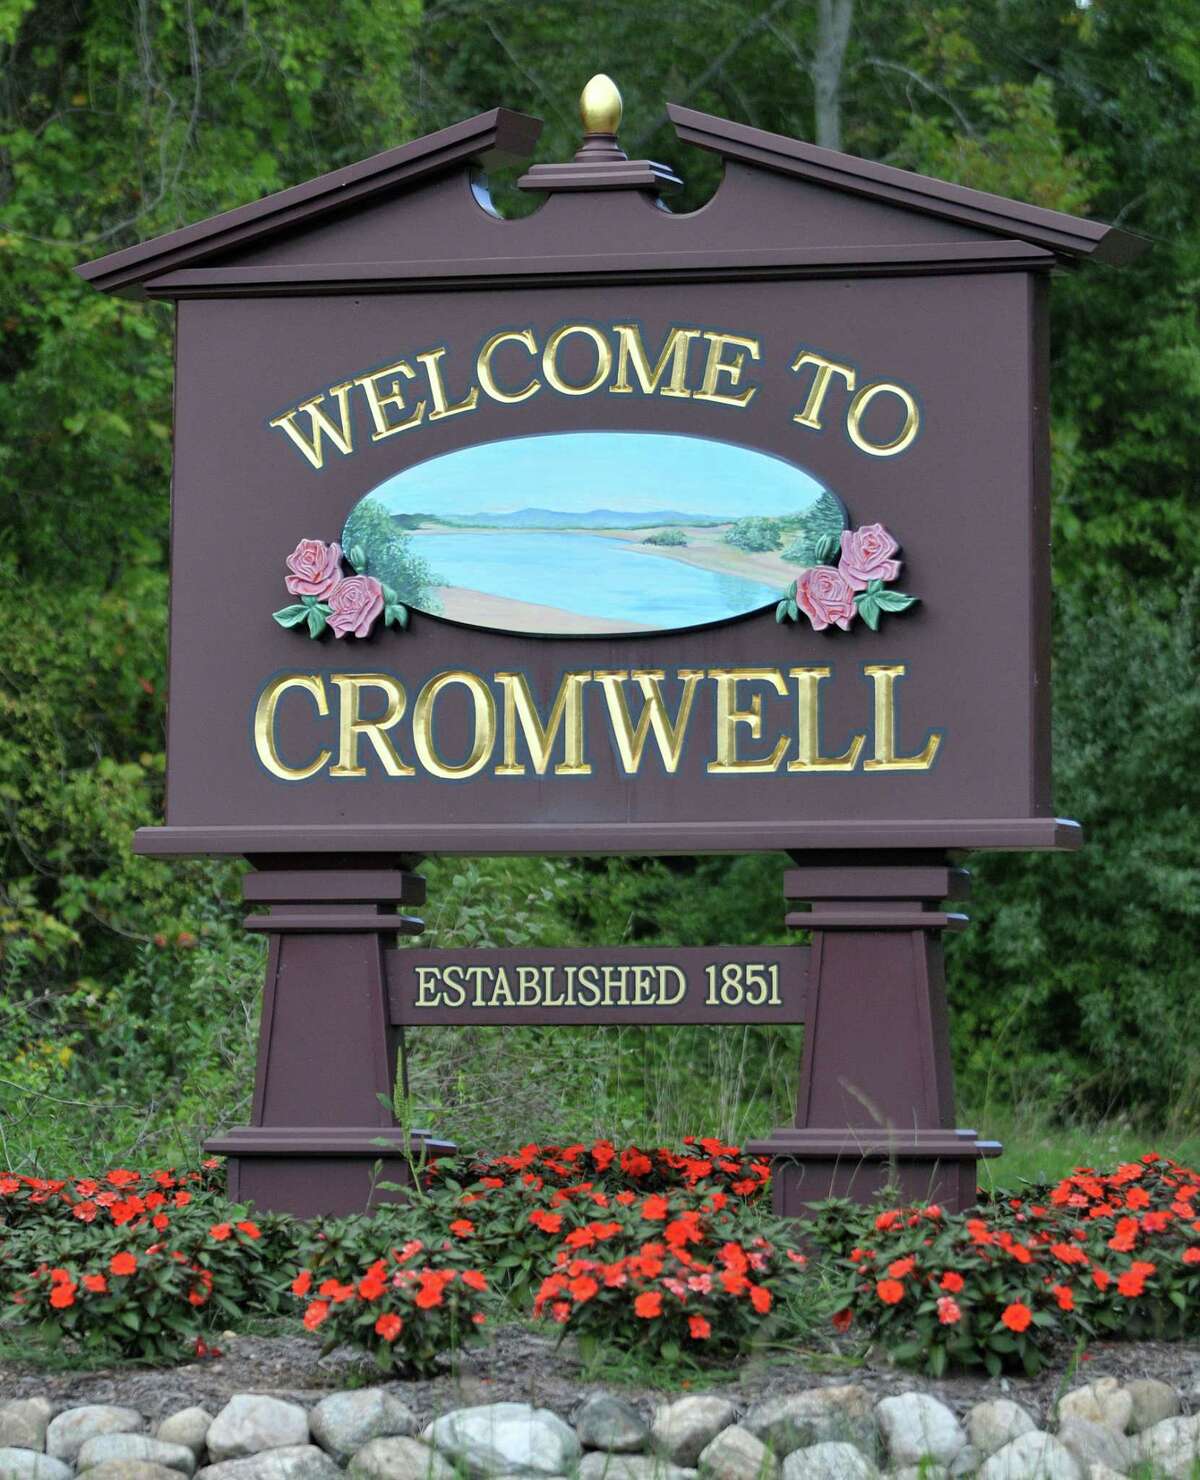 Cromwell Town Sign. Catherine Avalone - The Middletown Press